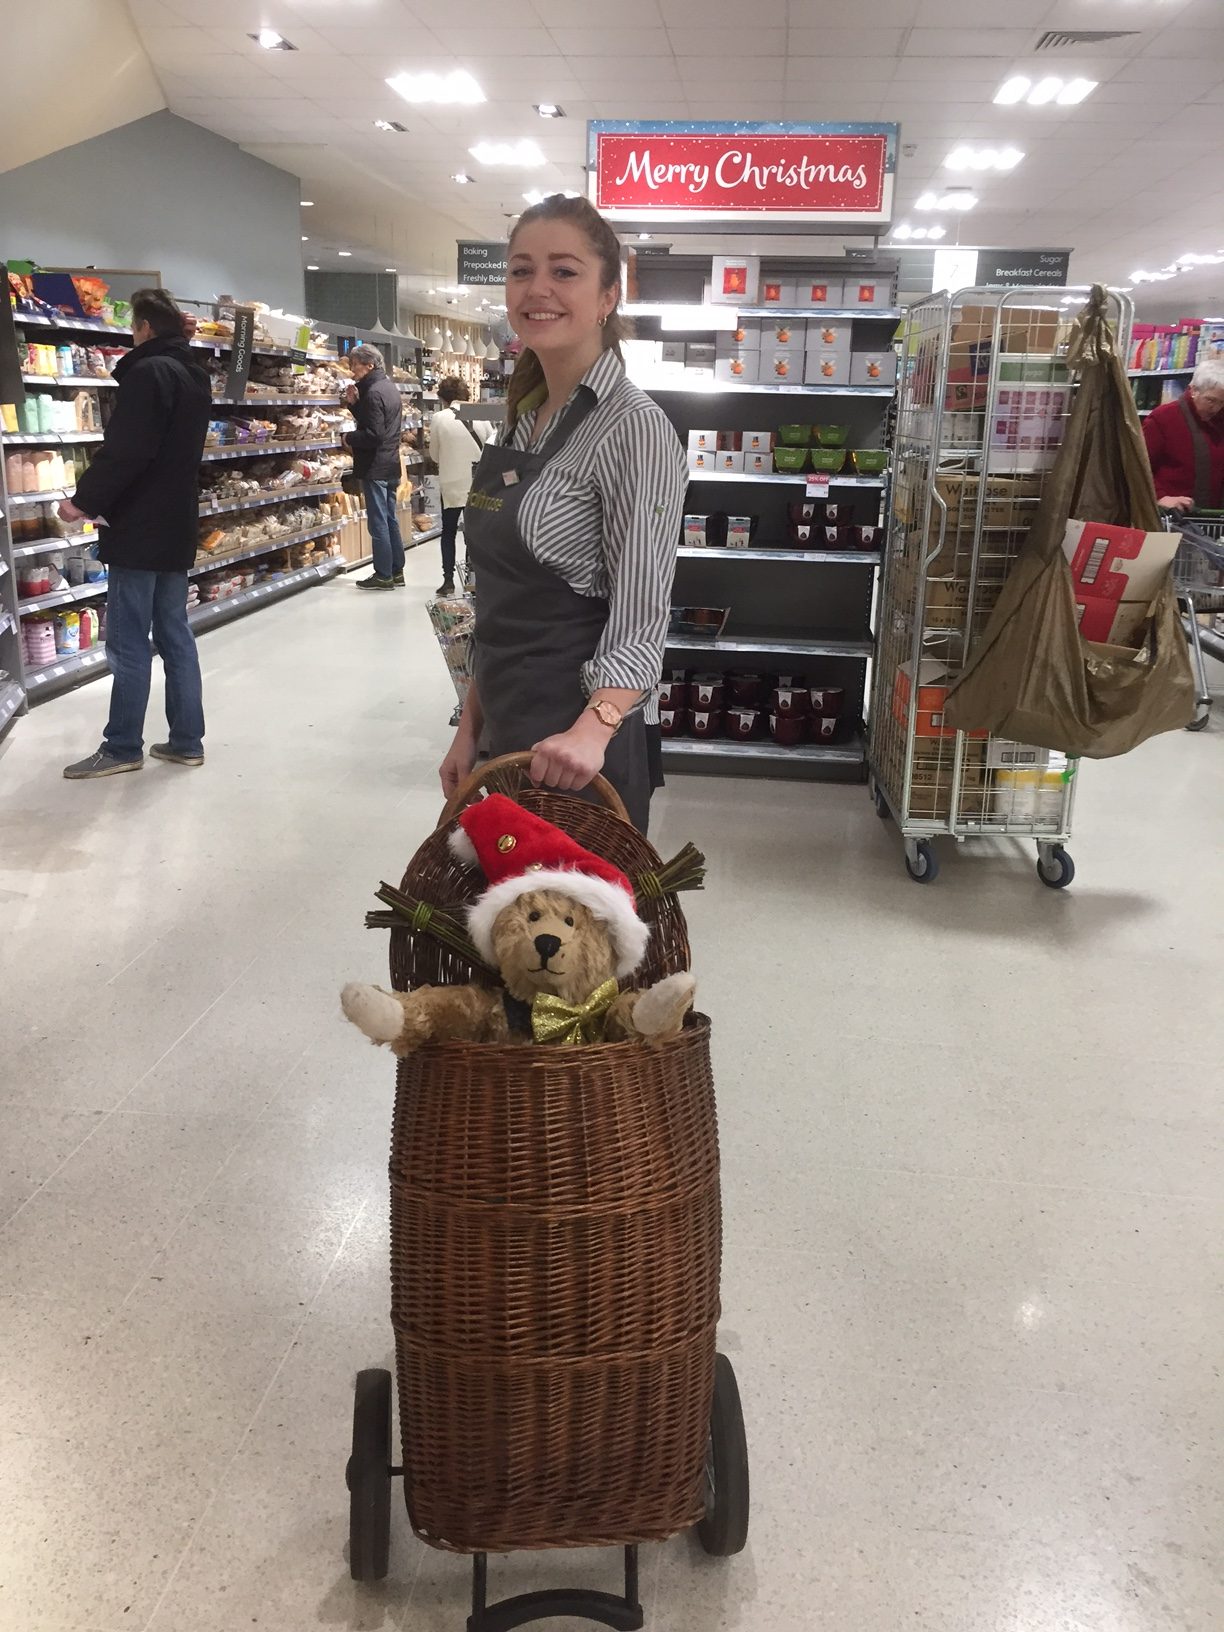 Old Bears - Eve and Bobby 2 in Waitrose.